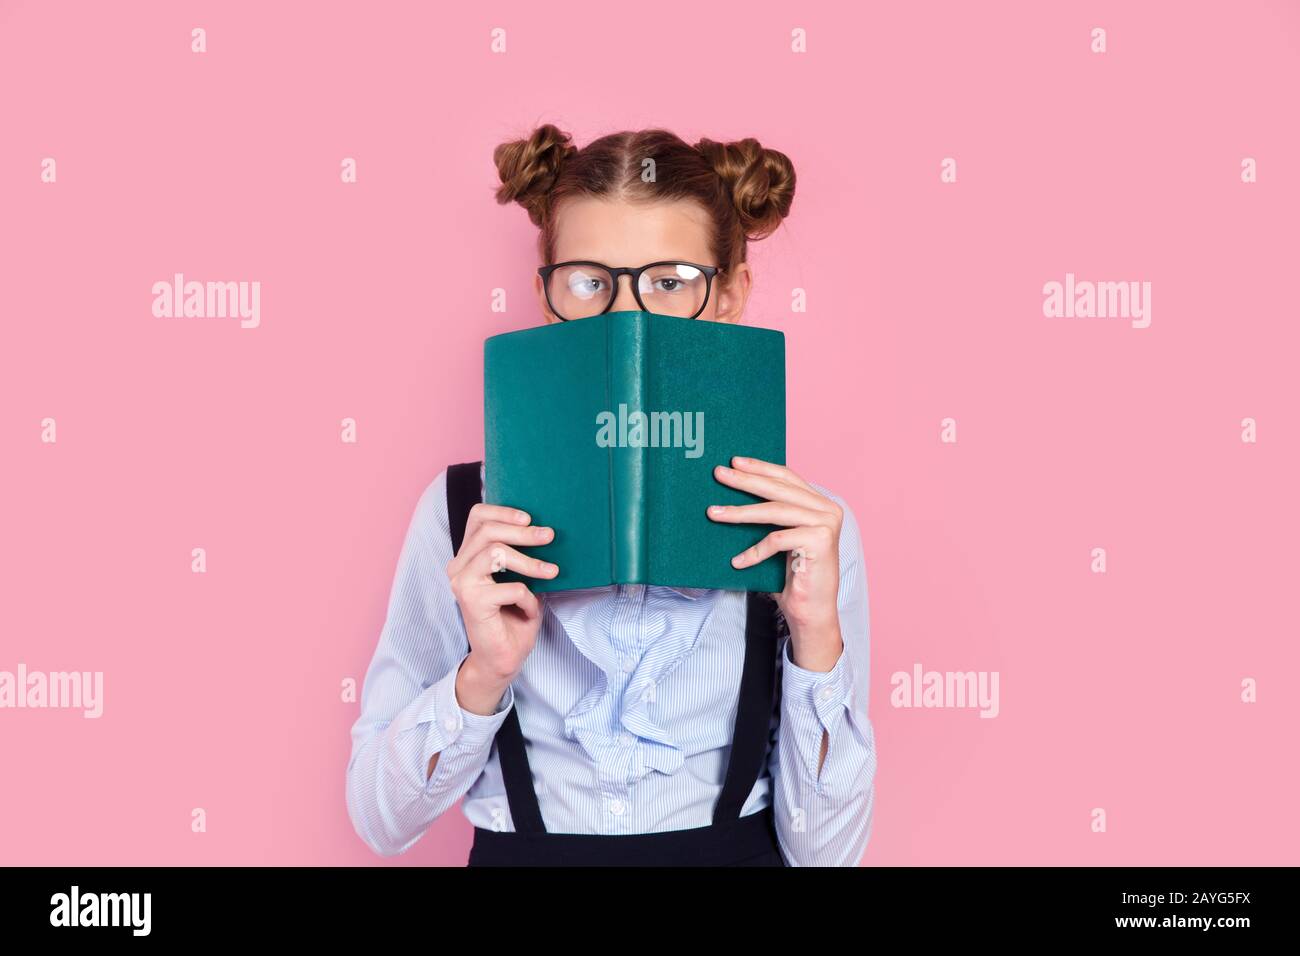 Young girl in school uniform and glasses holding book in front of her face Stock Photo